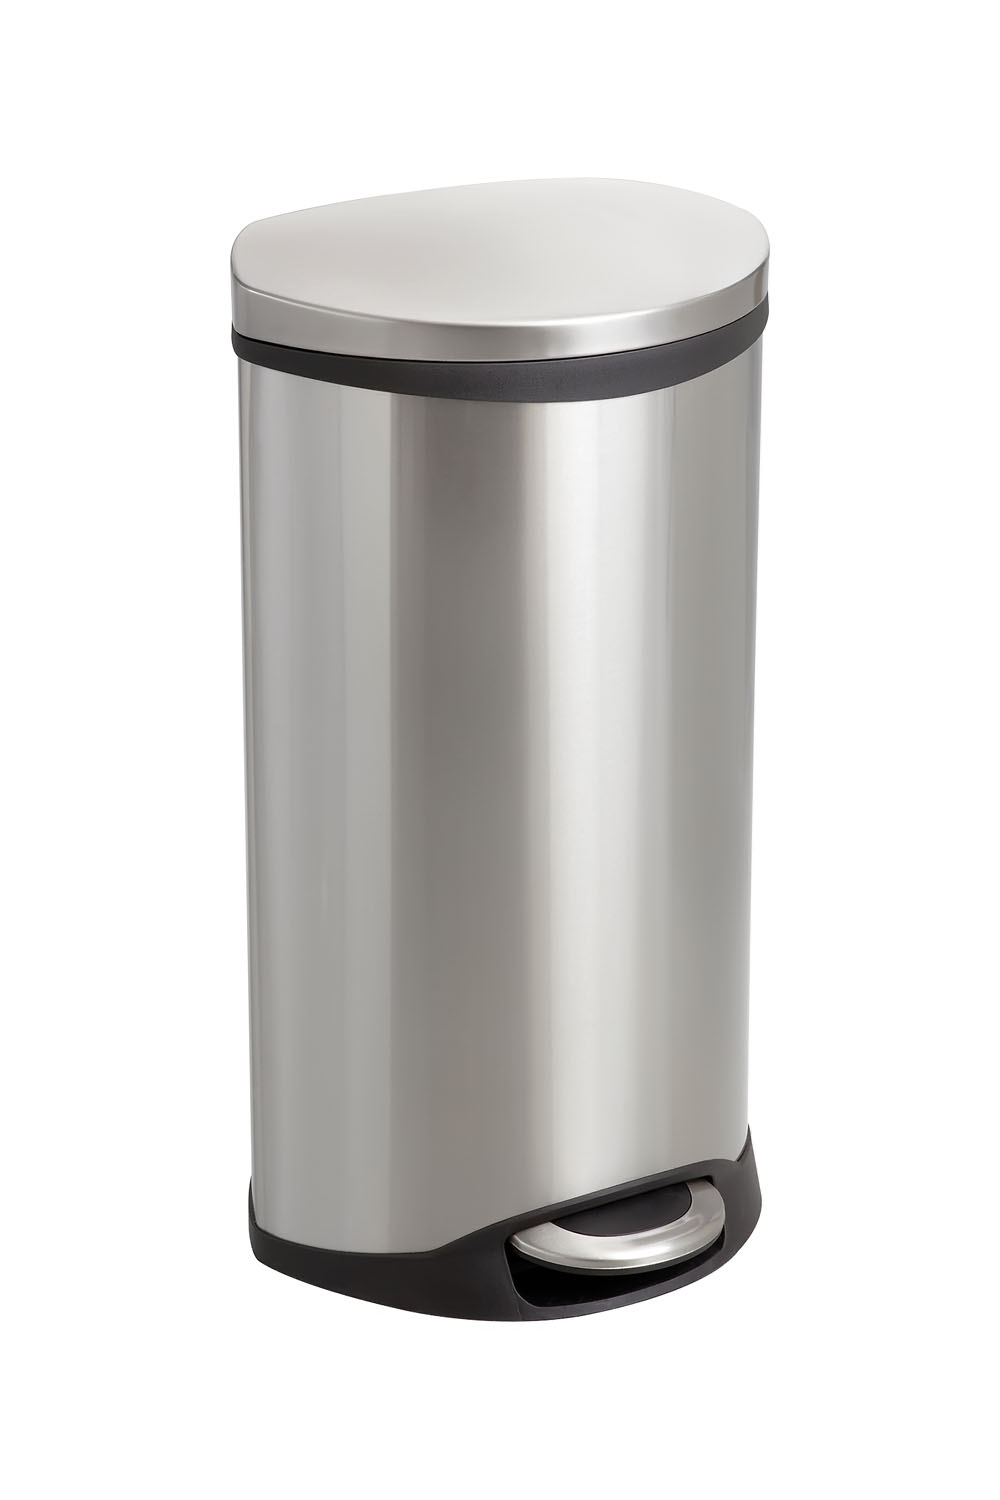 Safco Ellipse Hands Free Step-On Receptacle - 7.50 gal Capacity - 26.5" Height x 15" Width x 13.5" Depth - Steel, Plastic - Stai